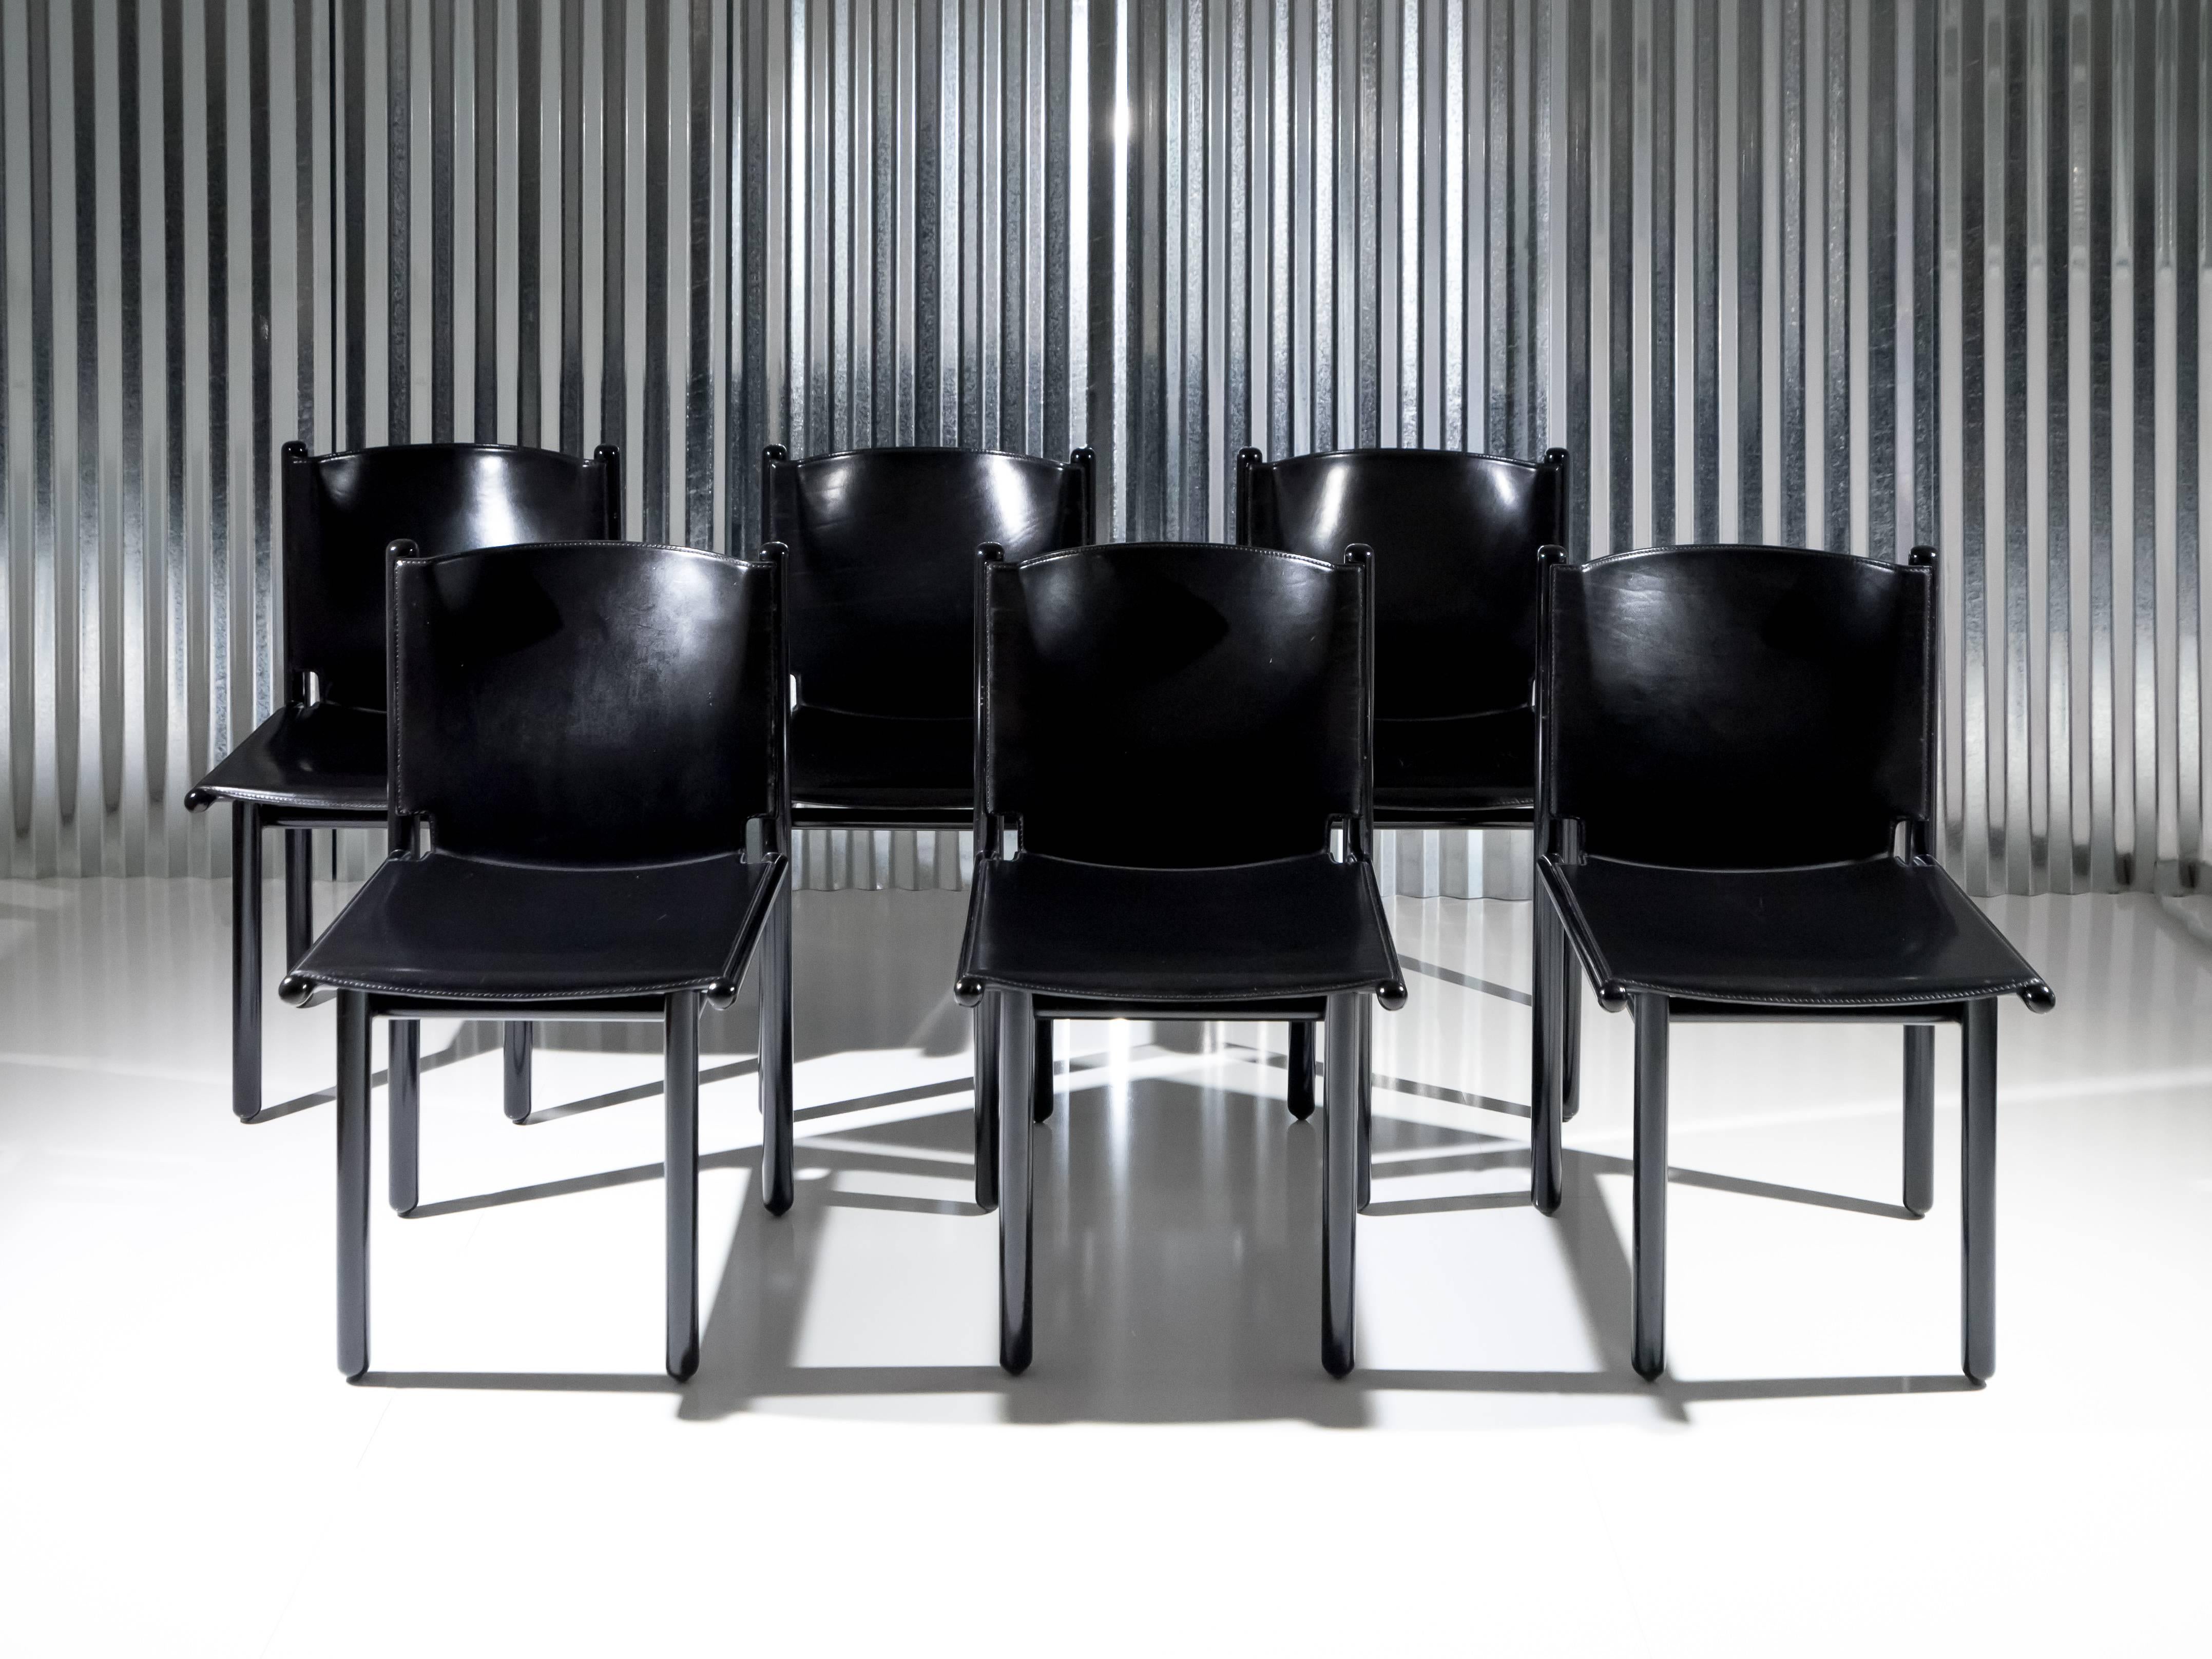 This set of six 'Caprile' chairs designed by Gianfranco Frattini for Cassina in 1985 display a black lacquer finish that elegantly merges with the black saddle leather molded seat and back. Designed by Frattini after spending the previous year in